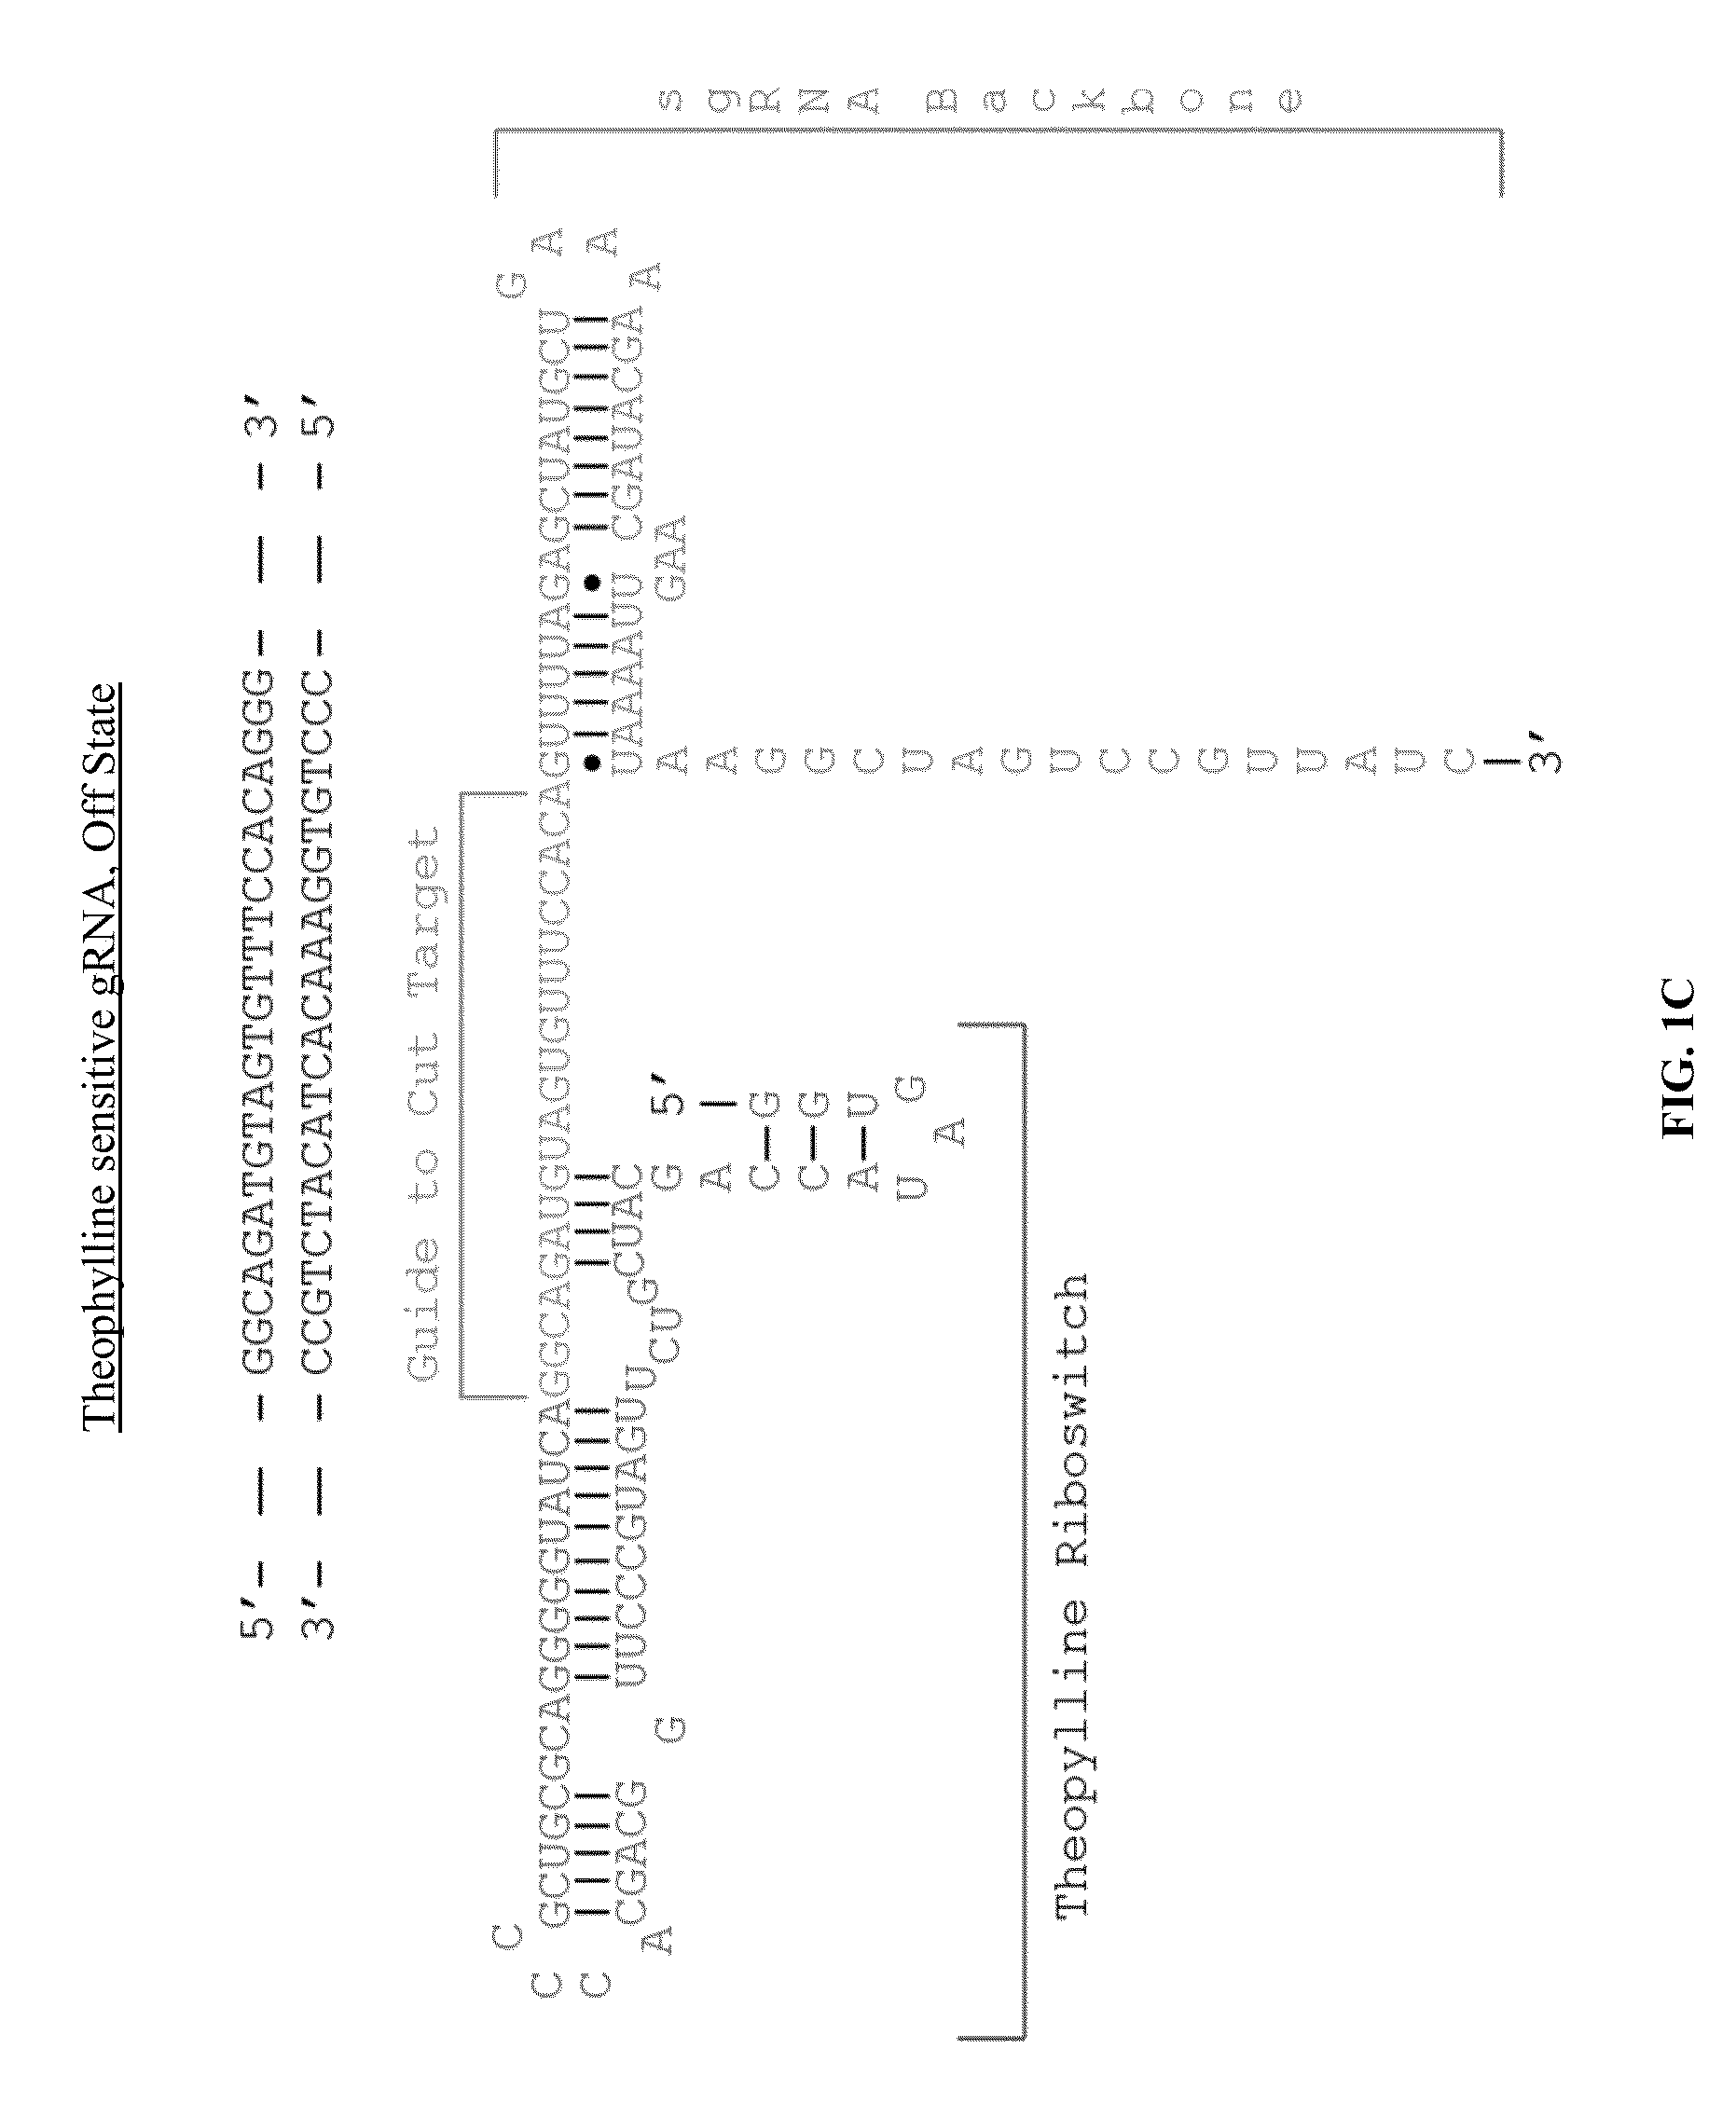 Switchable grnas comprising aptamers